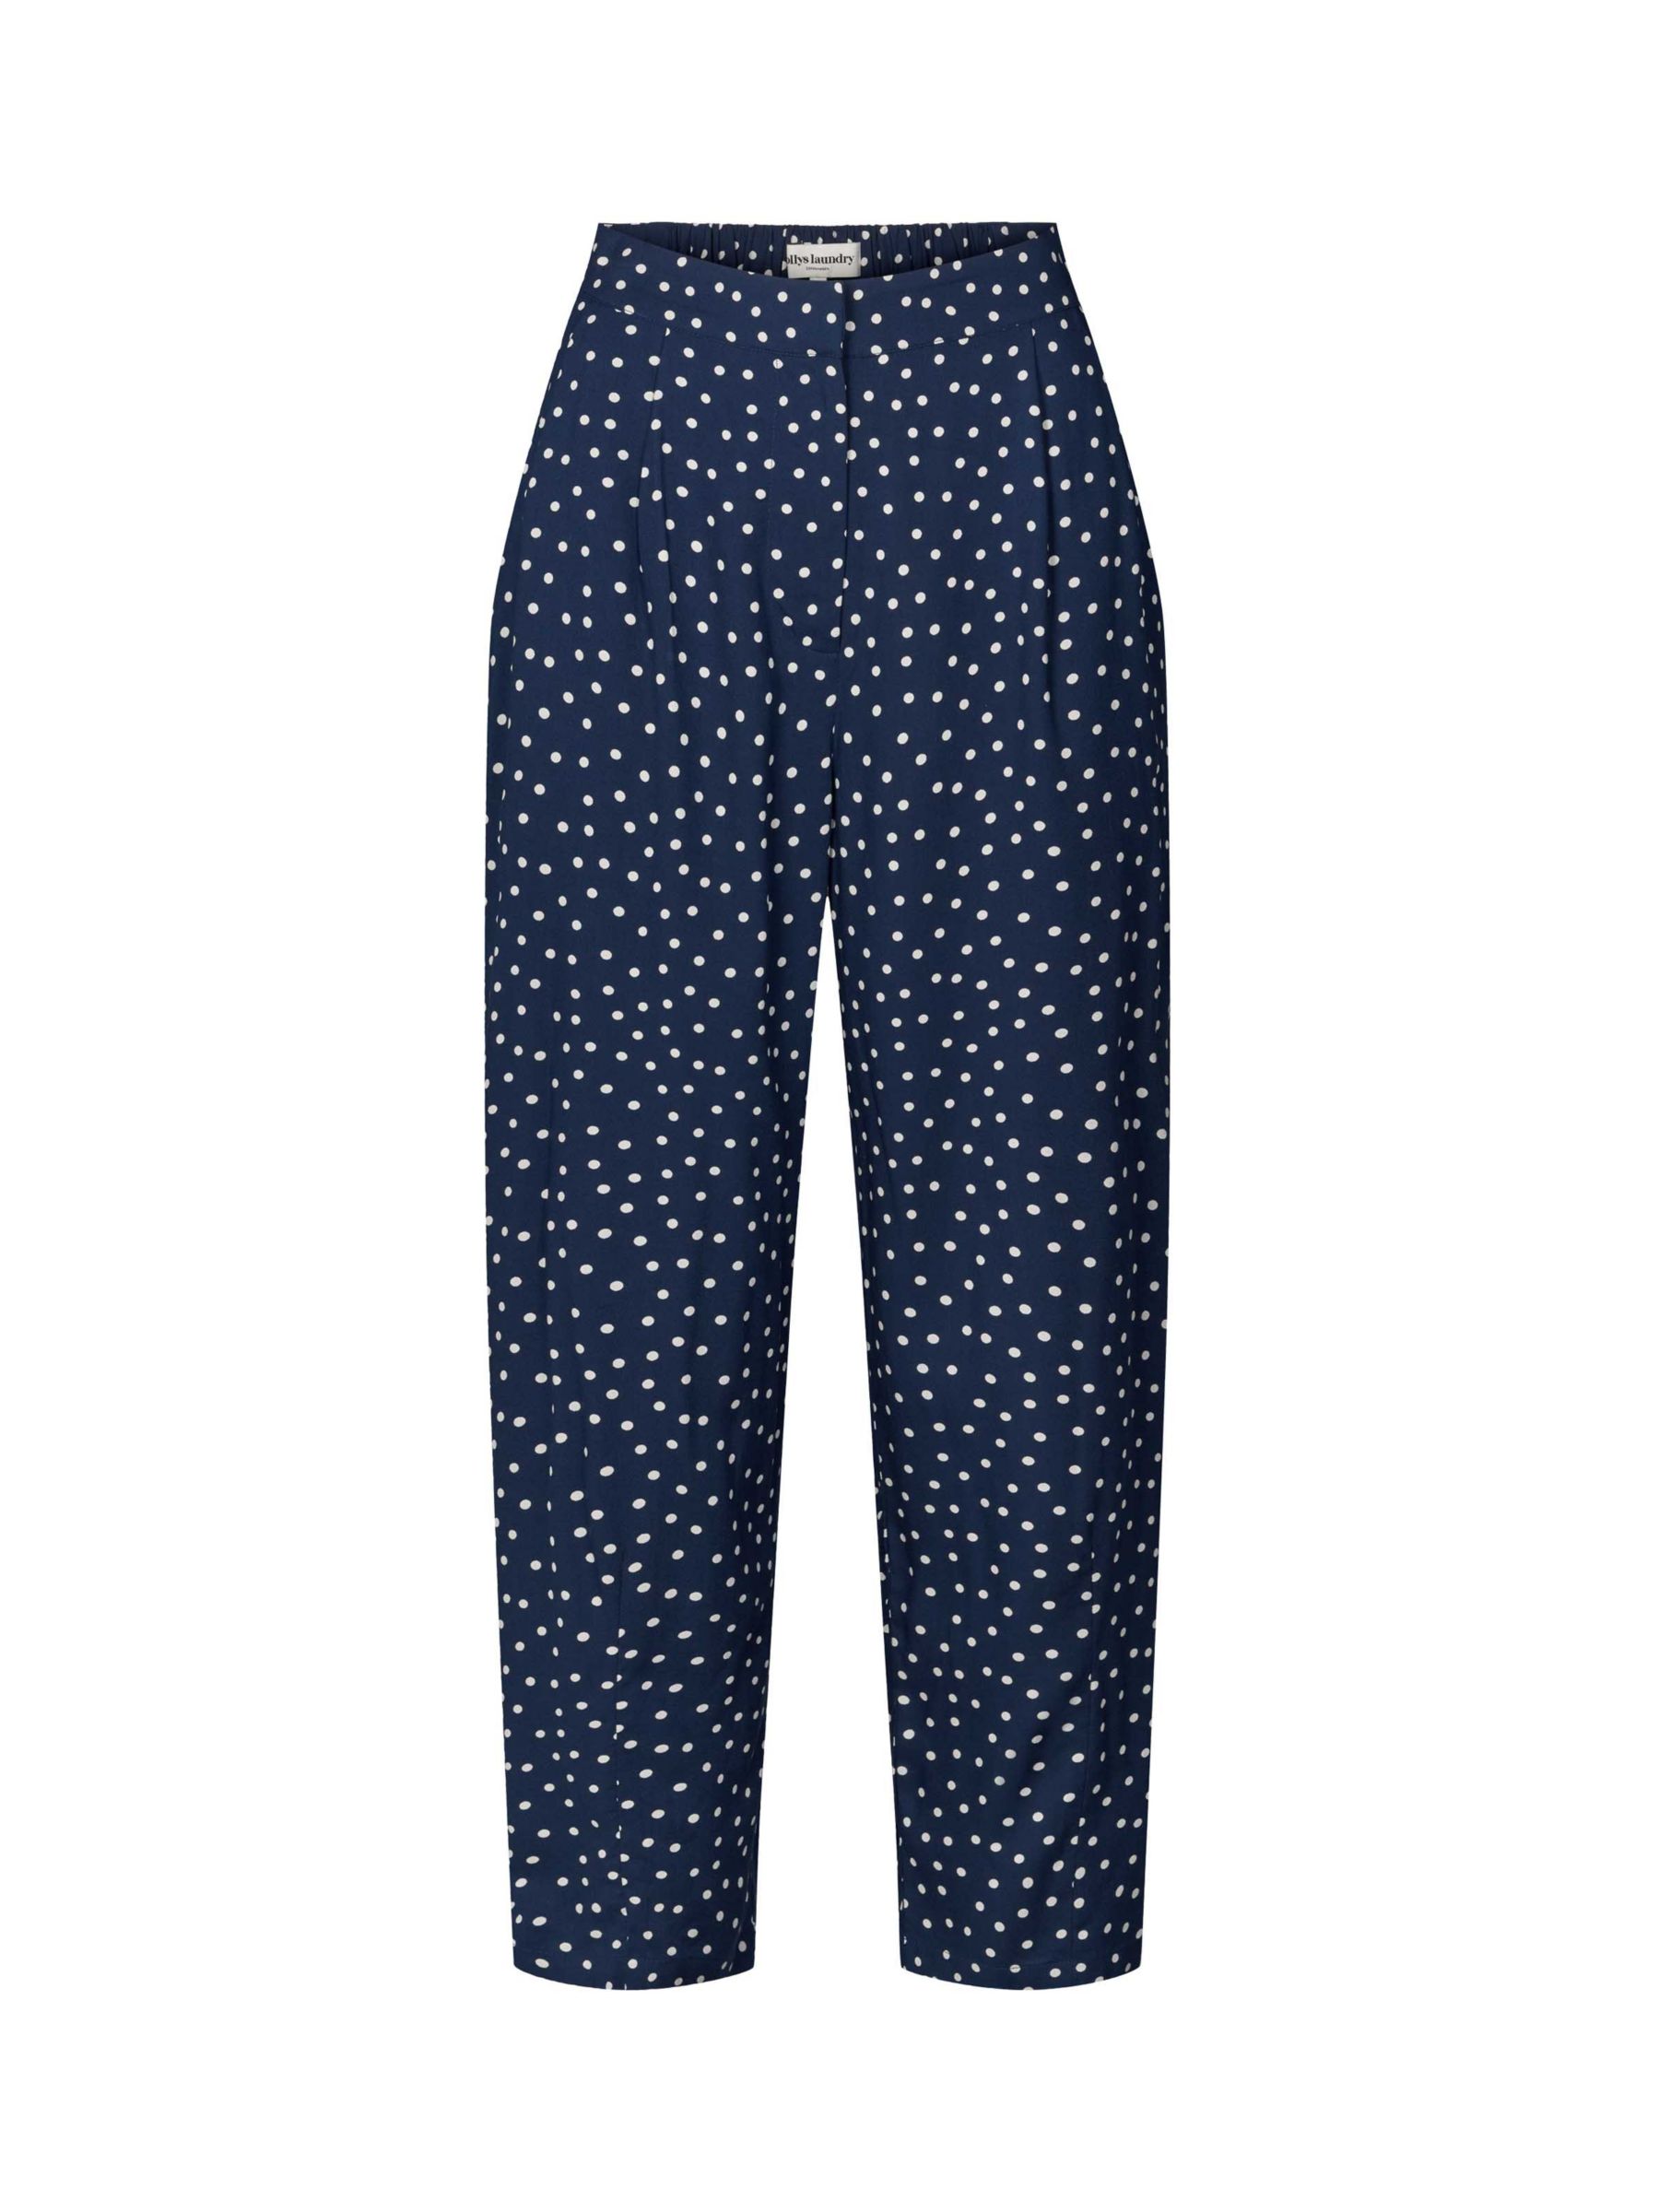 Lollys Laundry Maisie Dot Print Cropped Pleat Trousers, Navy/White, XS